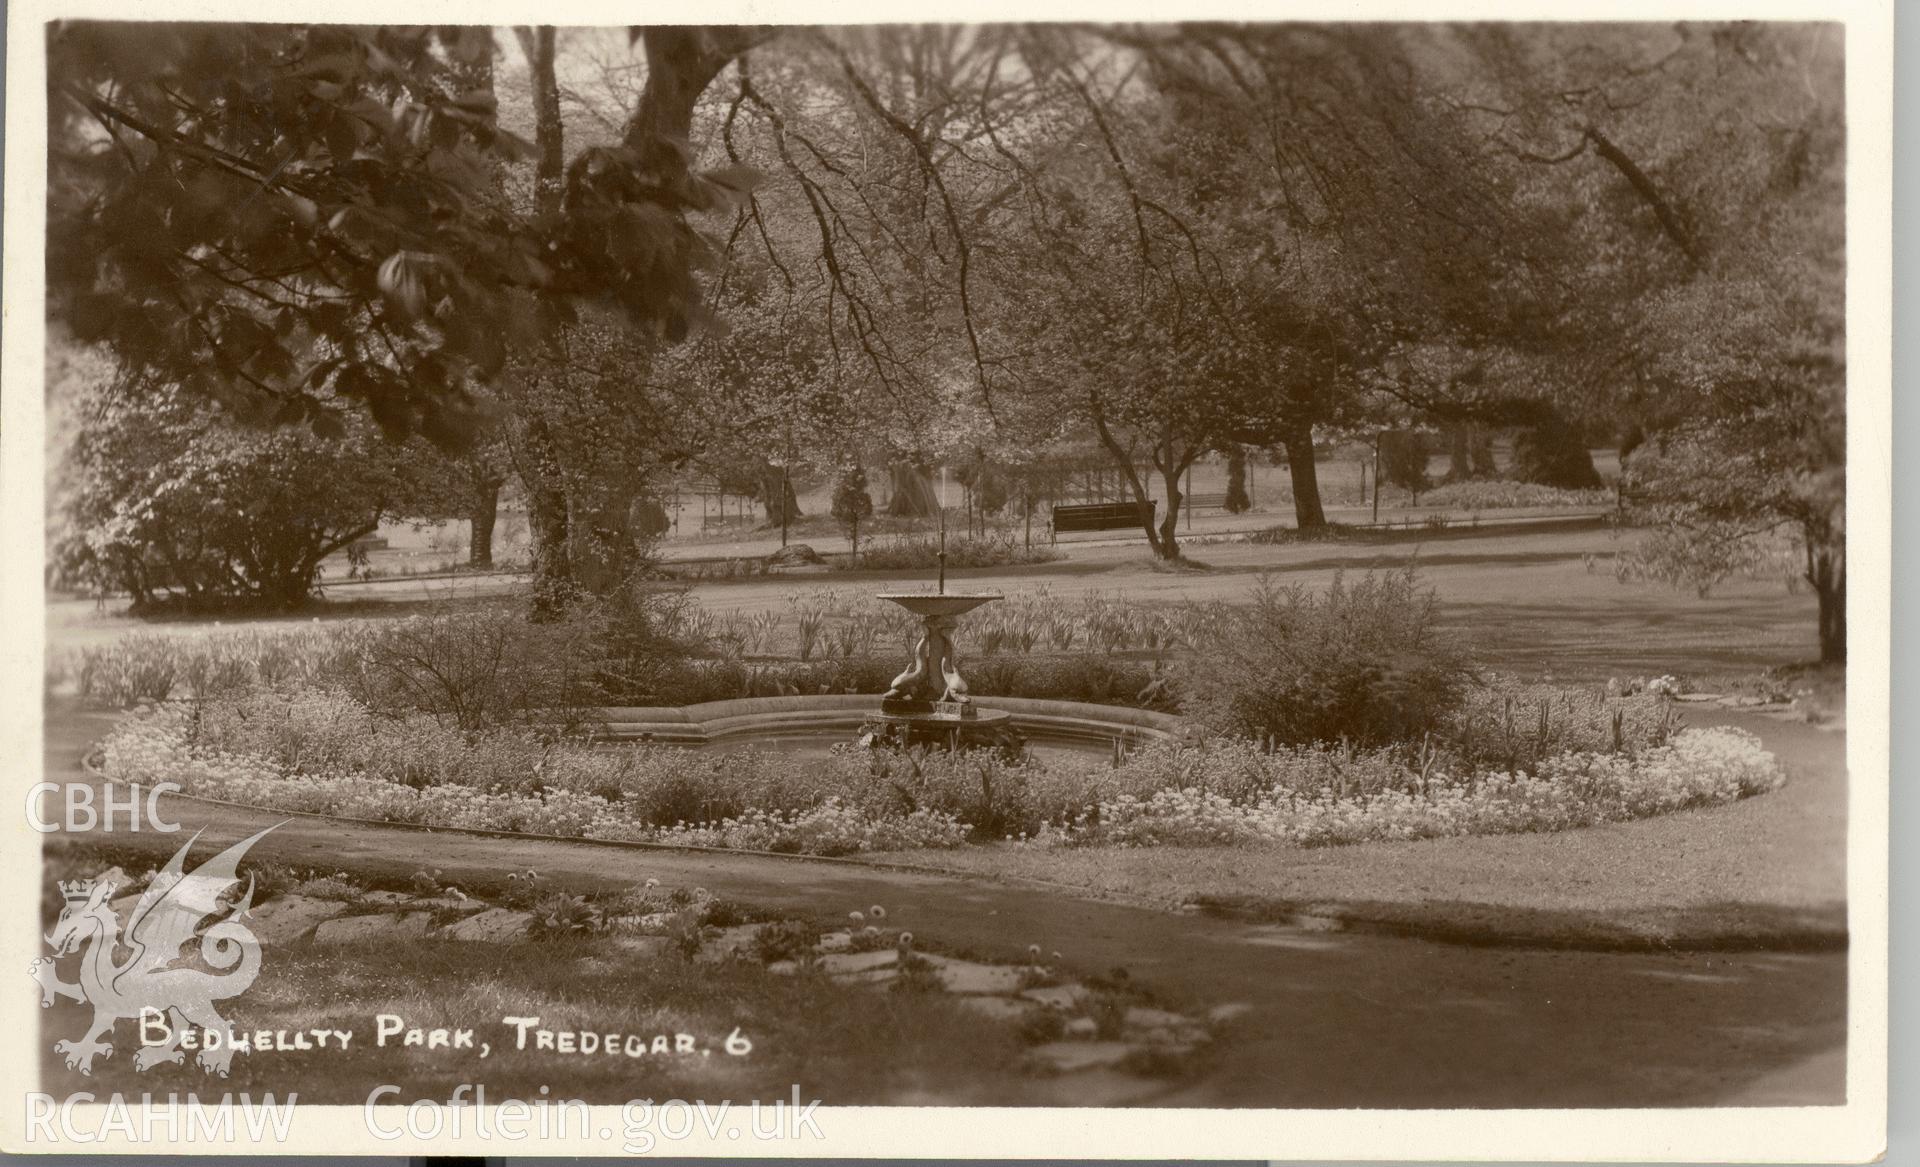 Digitised postcard image of the Fountain, Bedwellty Park. Produced by Parks and Gardens Data Services, from an original item in the Peter Davis Collection at Parks and Gardens UK. We hold only web-resolution images of this collection, suitable for viewing on screen and for research purposes only. We do not hold the original images, or publication quality scans.